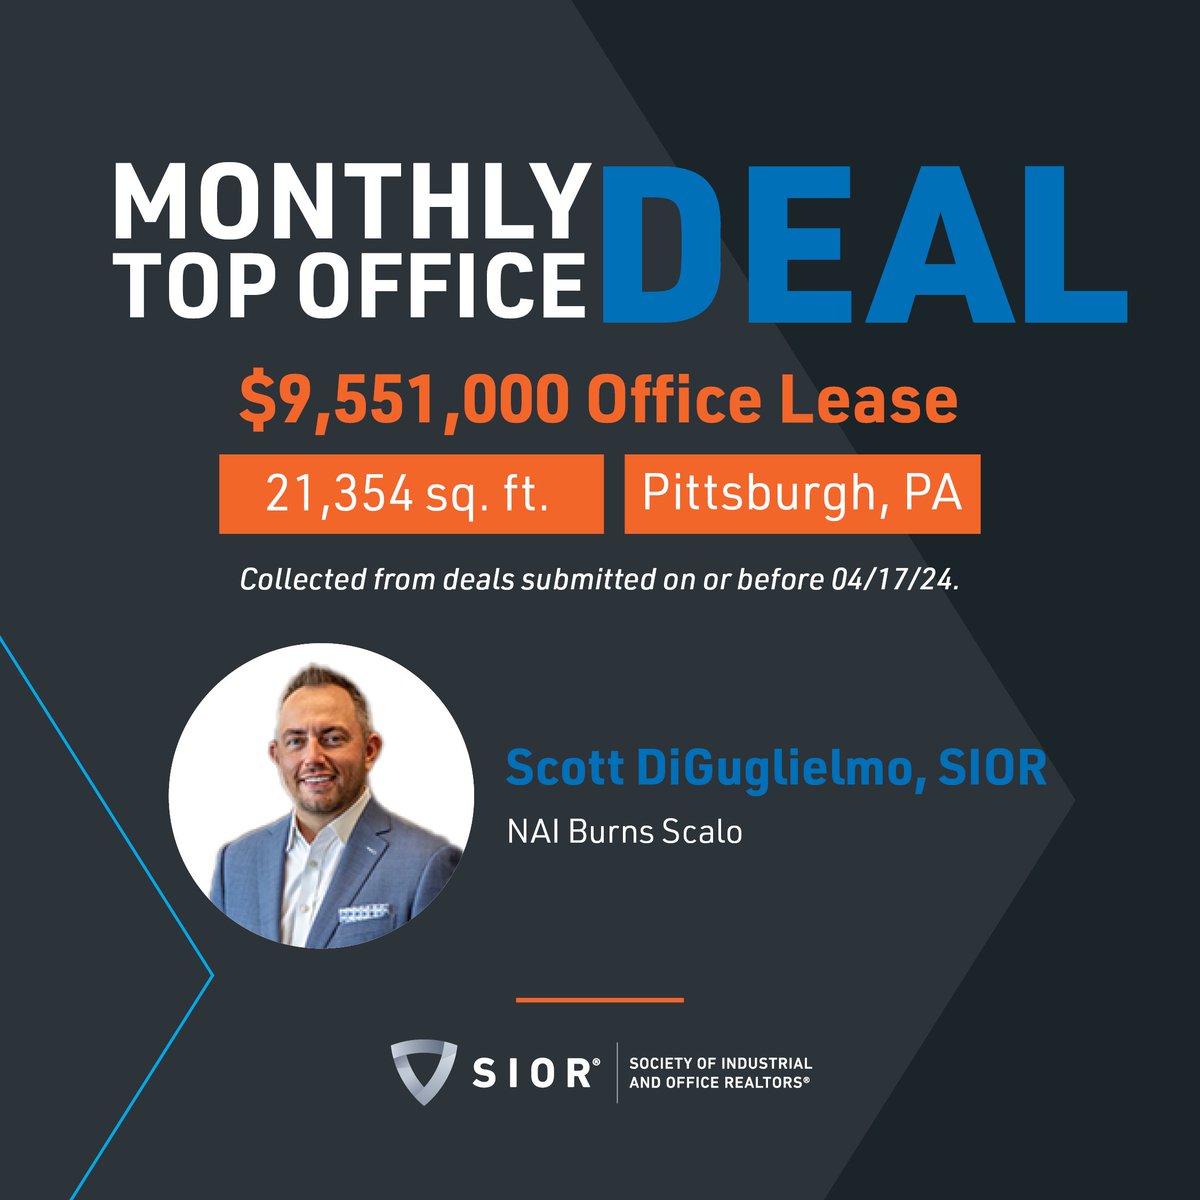 Where there's an SIOR, there's a way to close the deal. Congratulations to Scott DiGuglielmo, SIOR, for landing the top deal of the month of March for his hard work on a $9.6M #office lease in Pittsburgh! Submit your deals: hubs.ly/Q02vd7sZ0 #CRE #Transactions #TopBrokers